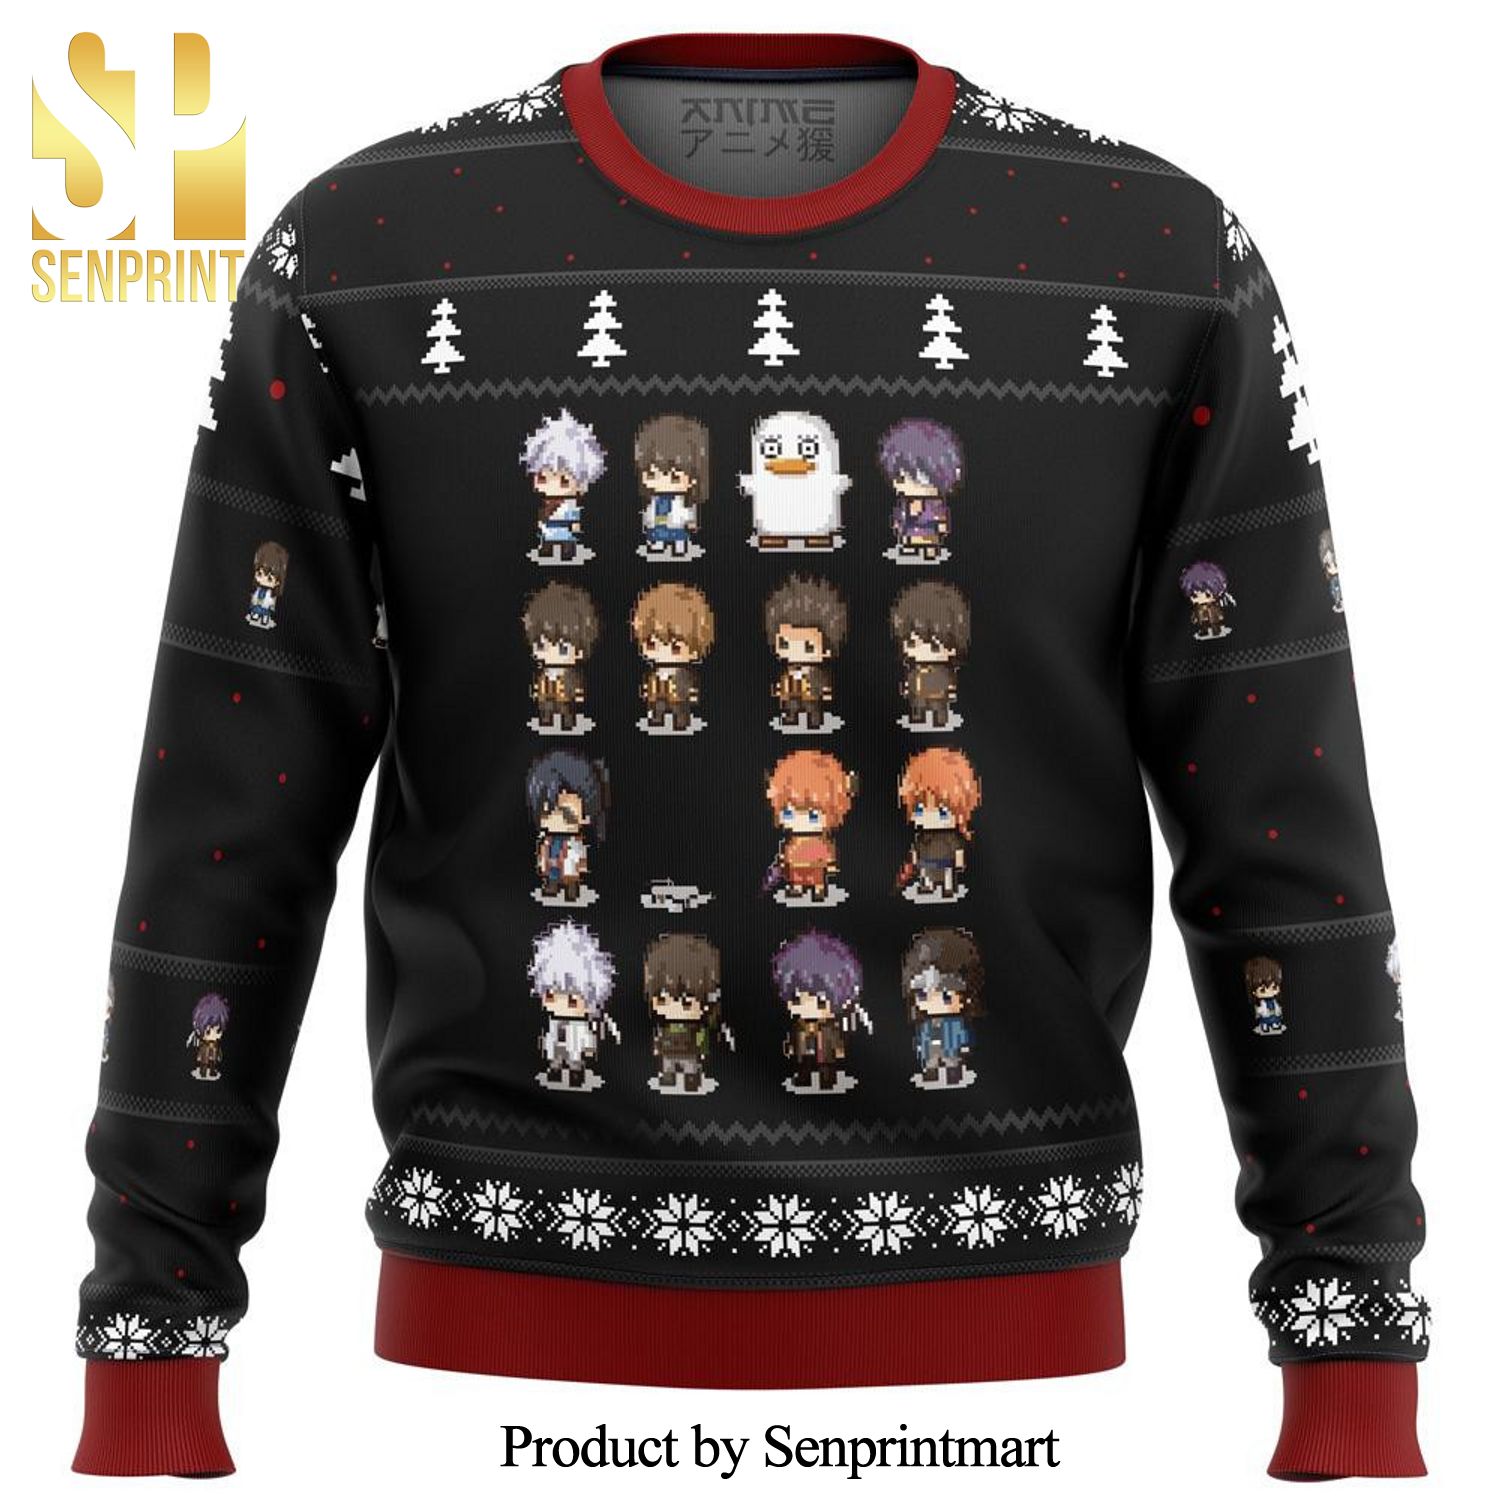 Gintama Sprites Premium Knitted Ugly Christmas Sweater